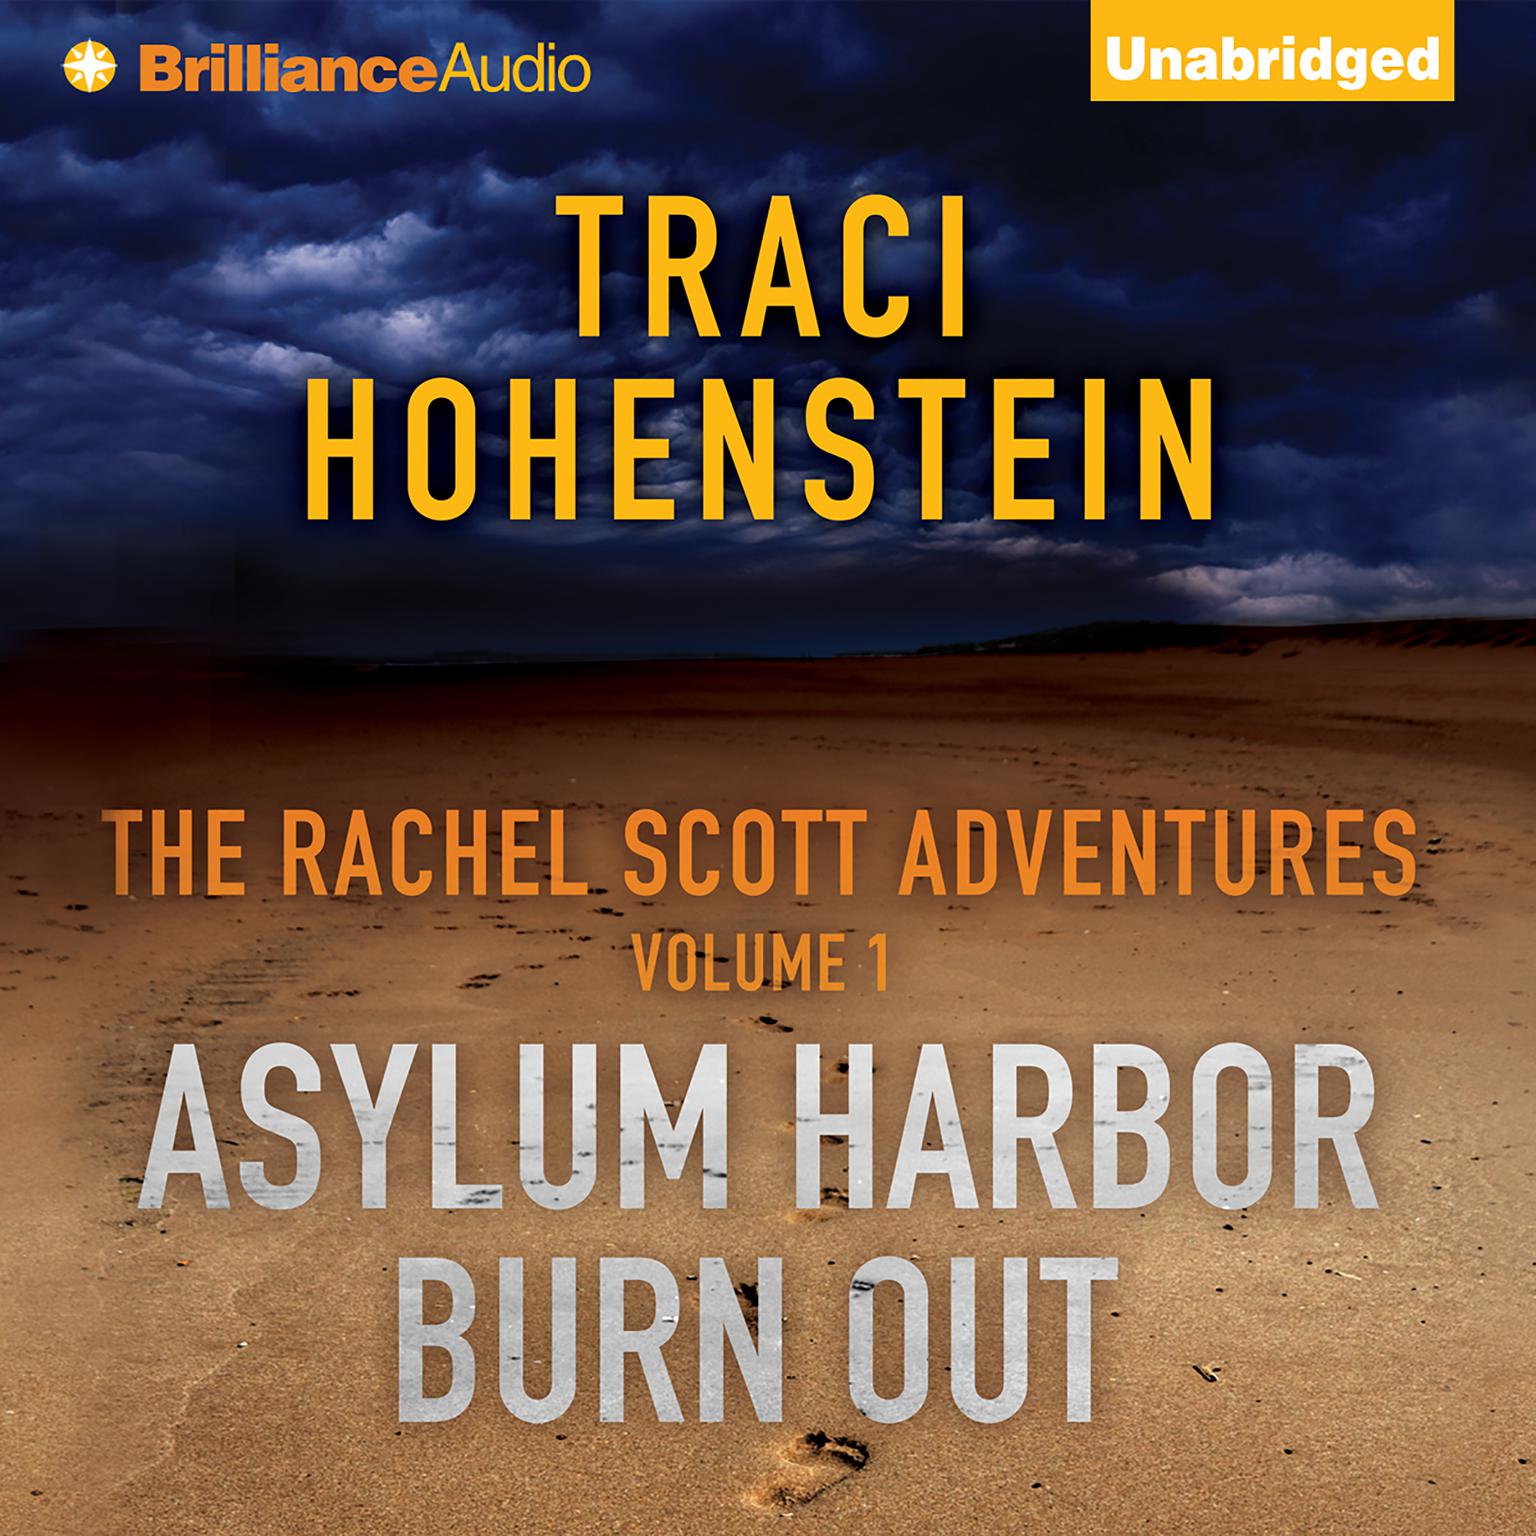 The Rachel Scott Adventures Vol 1: Asylum Harbor and Burn Out Audiobook, by Traci Hohenstein